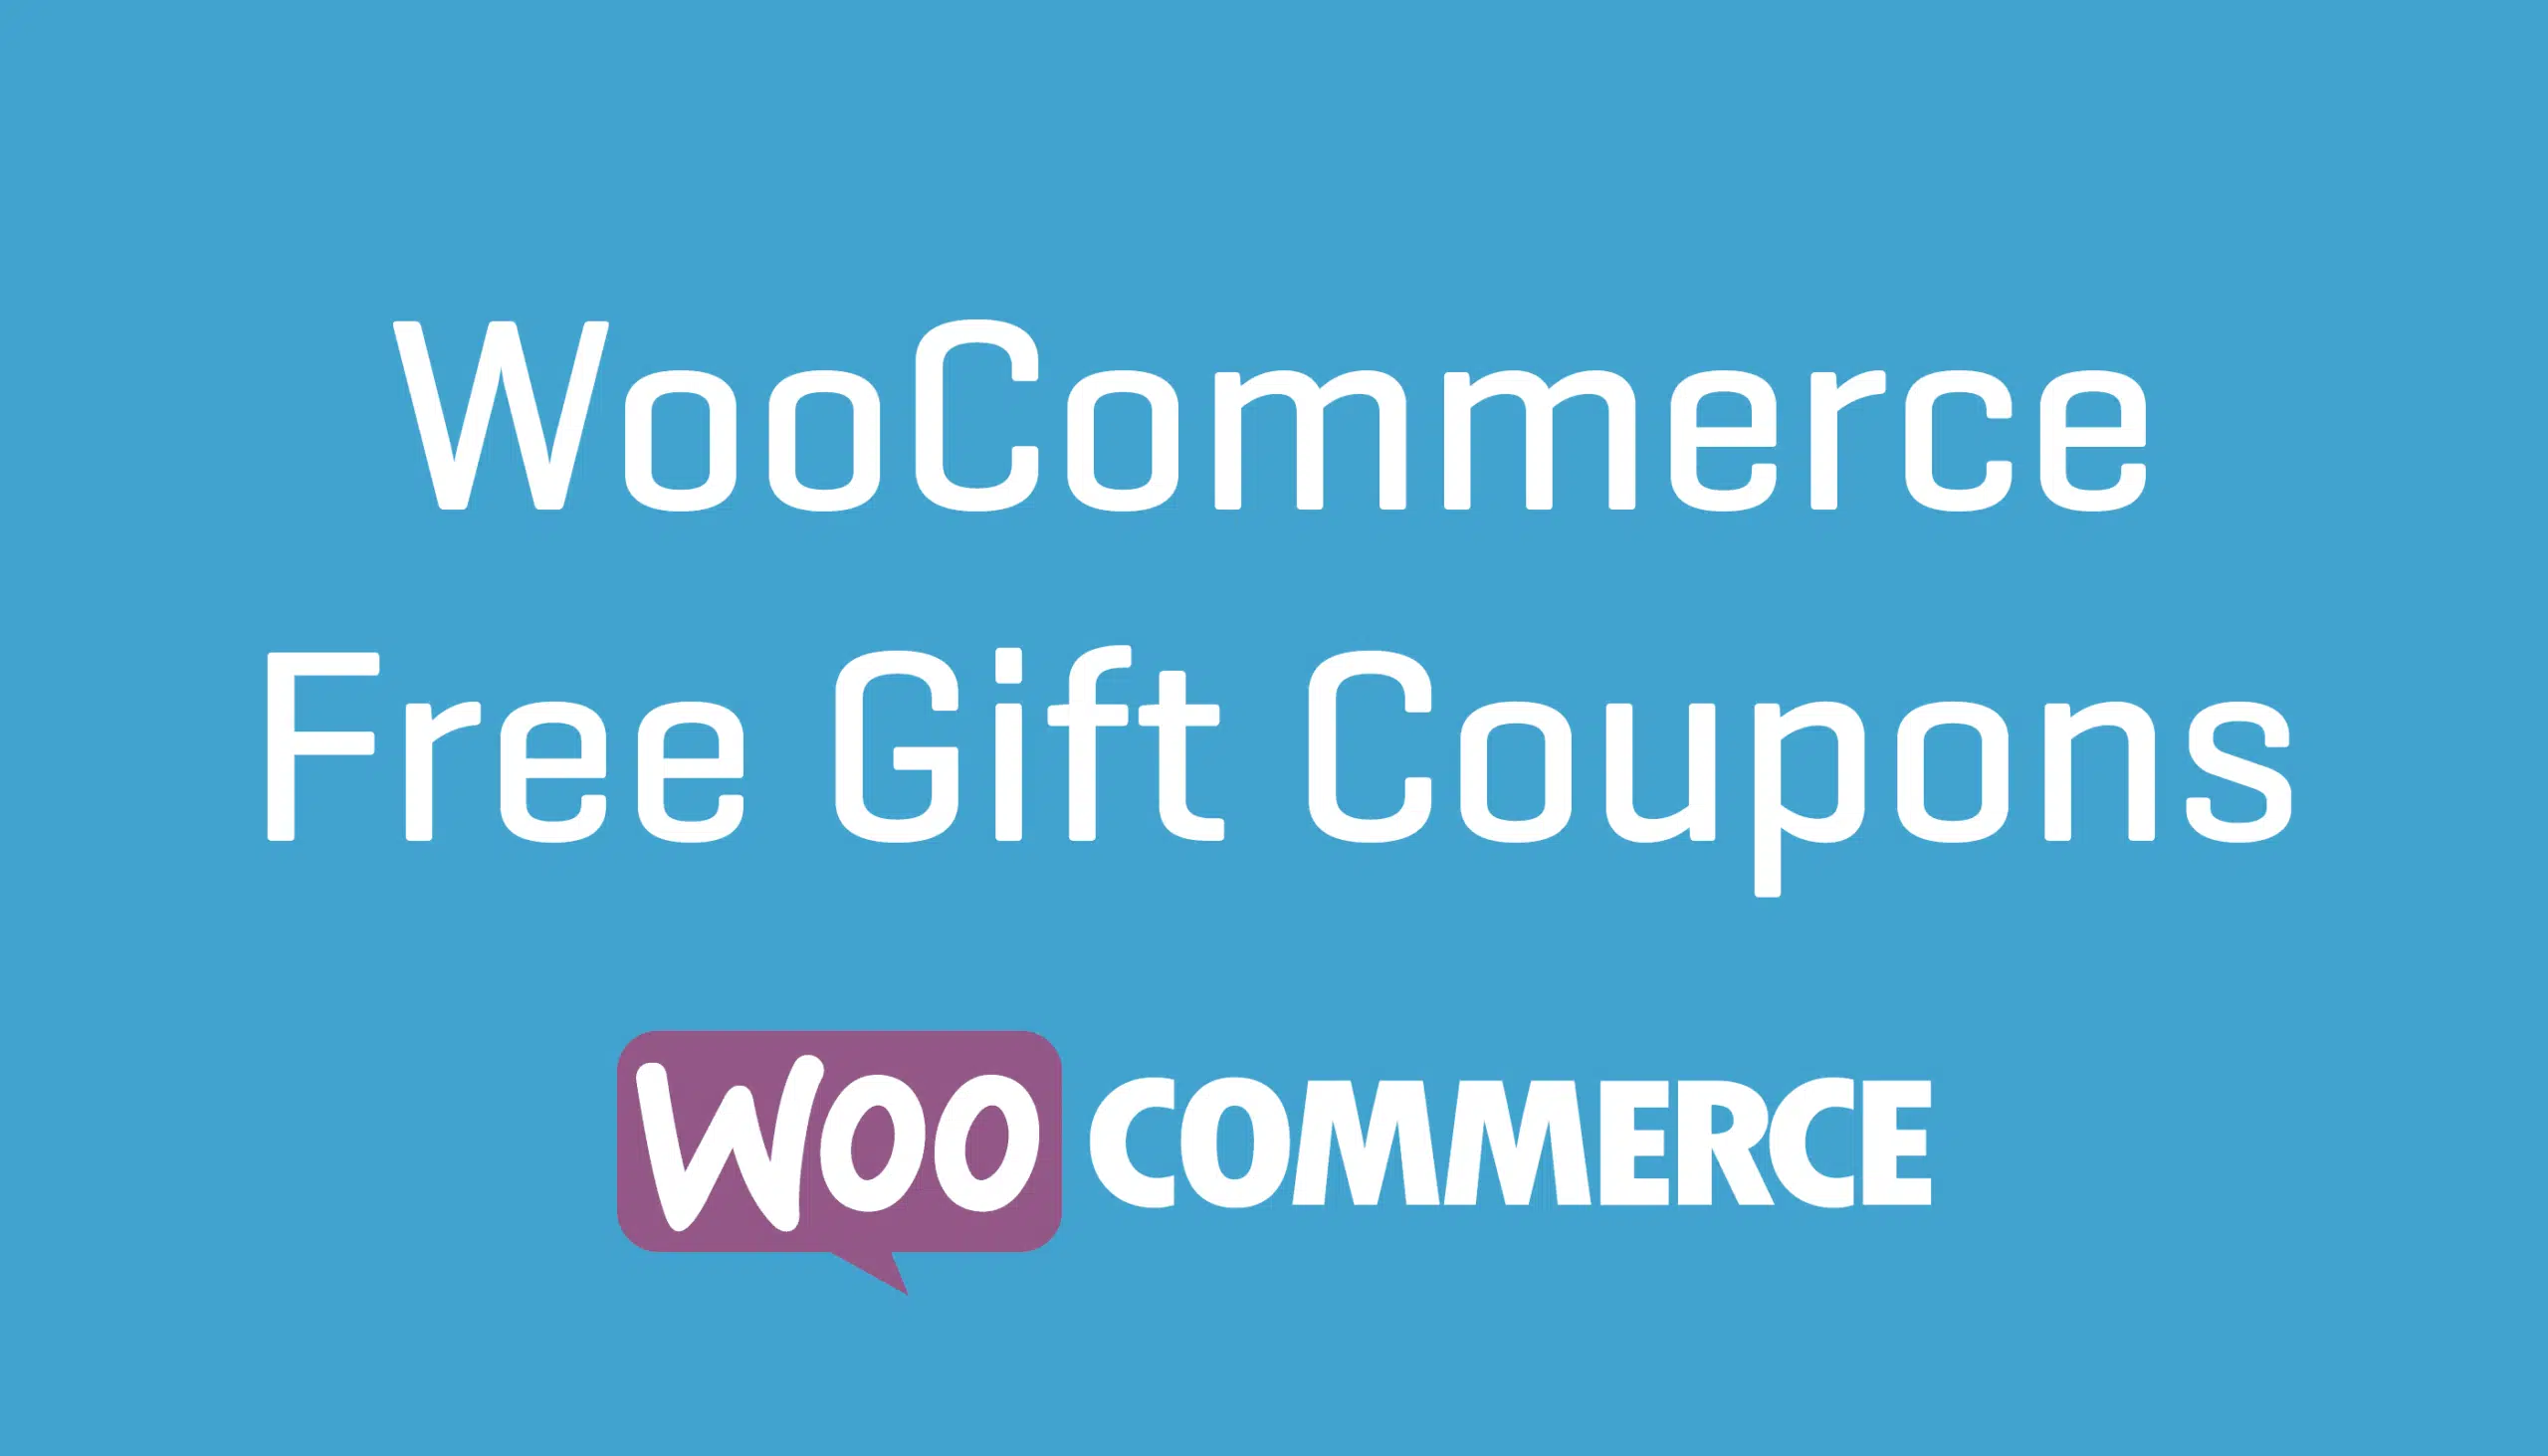 Free Gift Coupons for Woocommerce